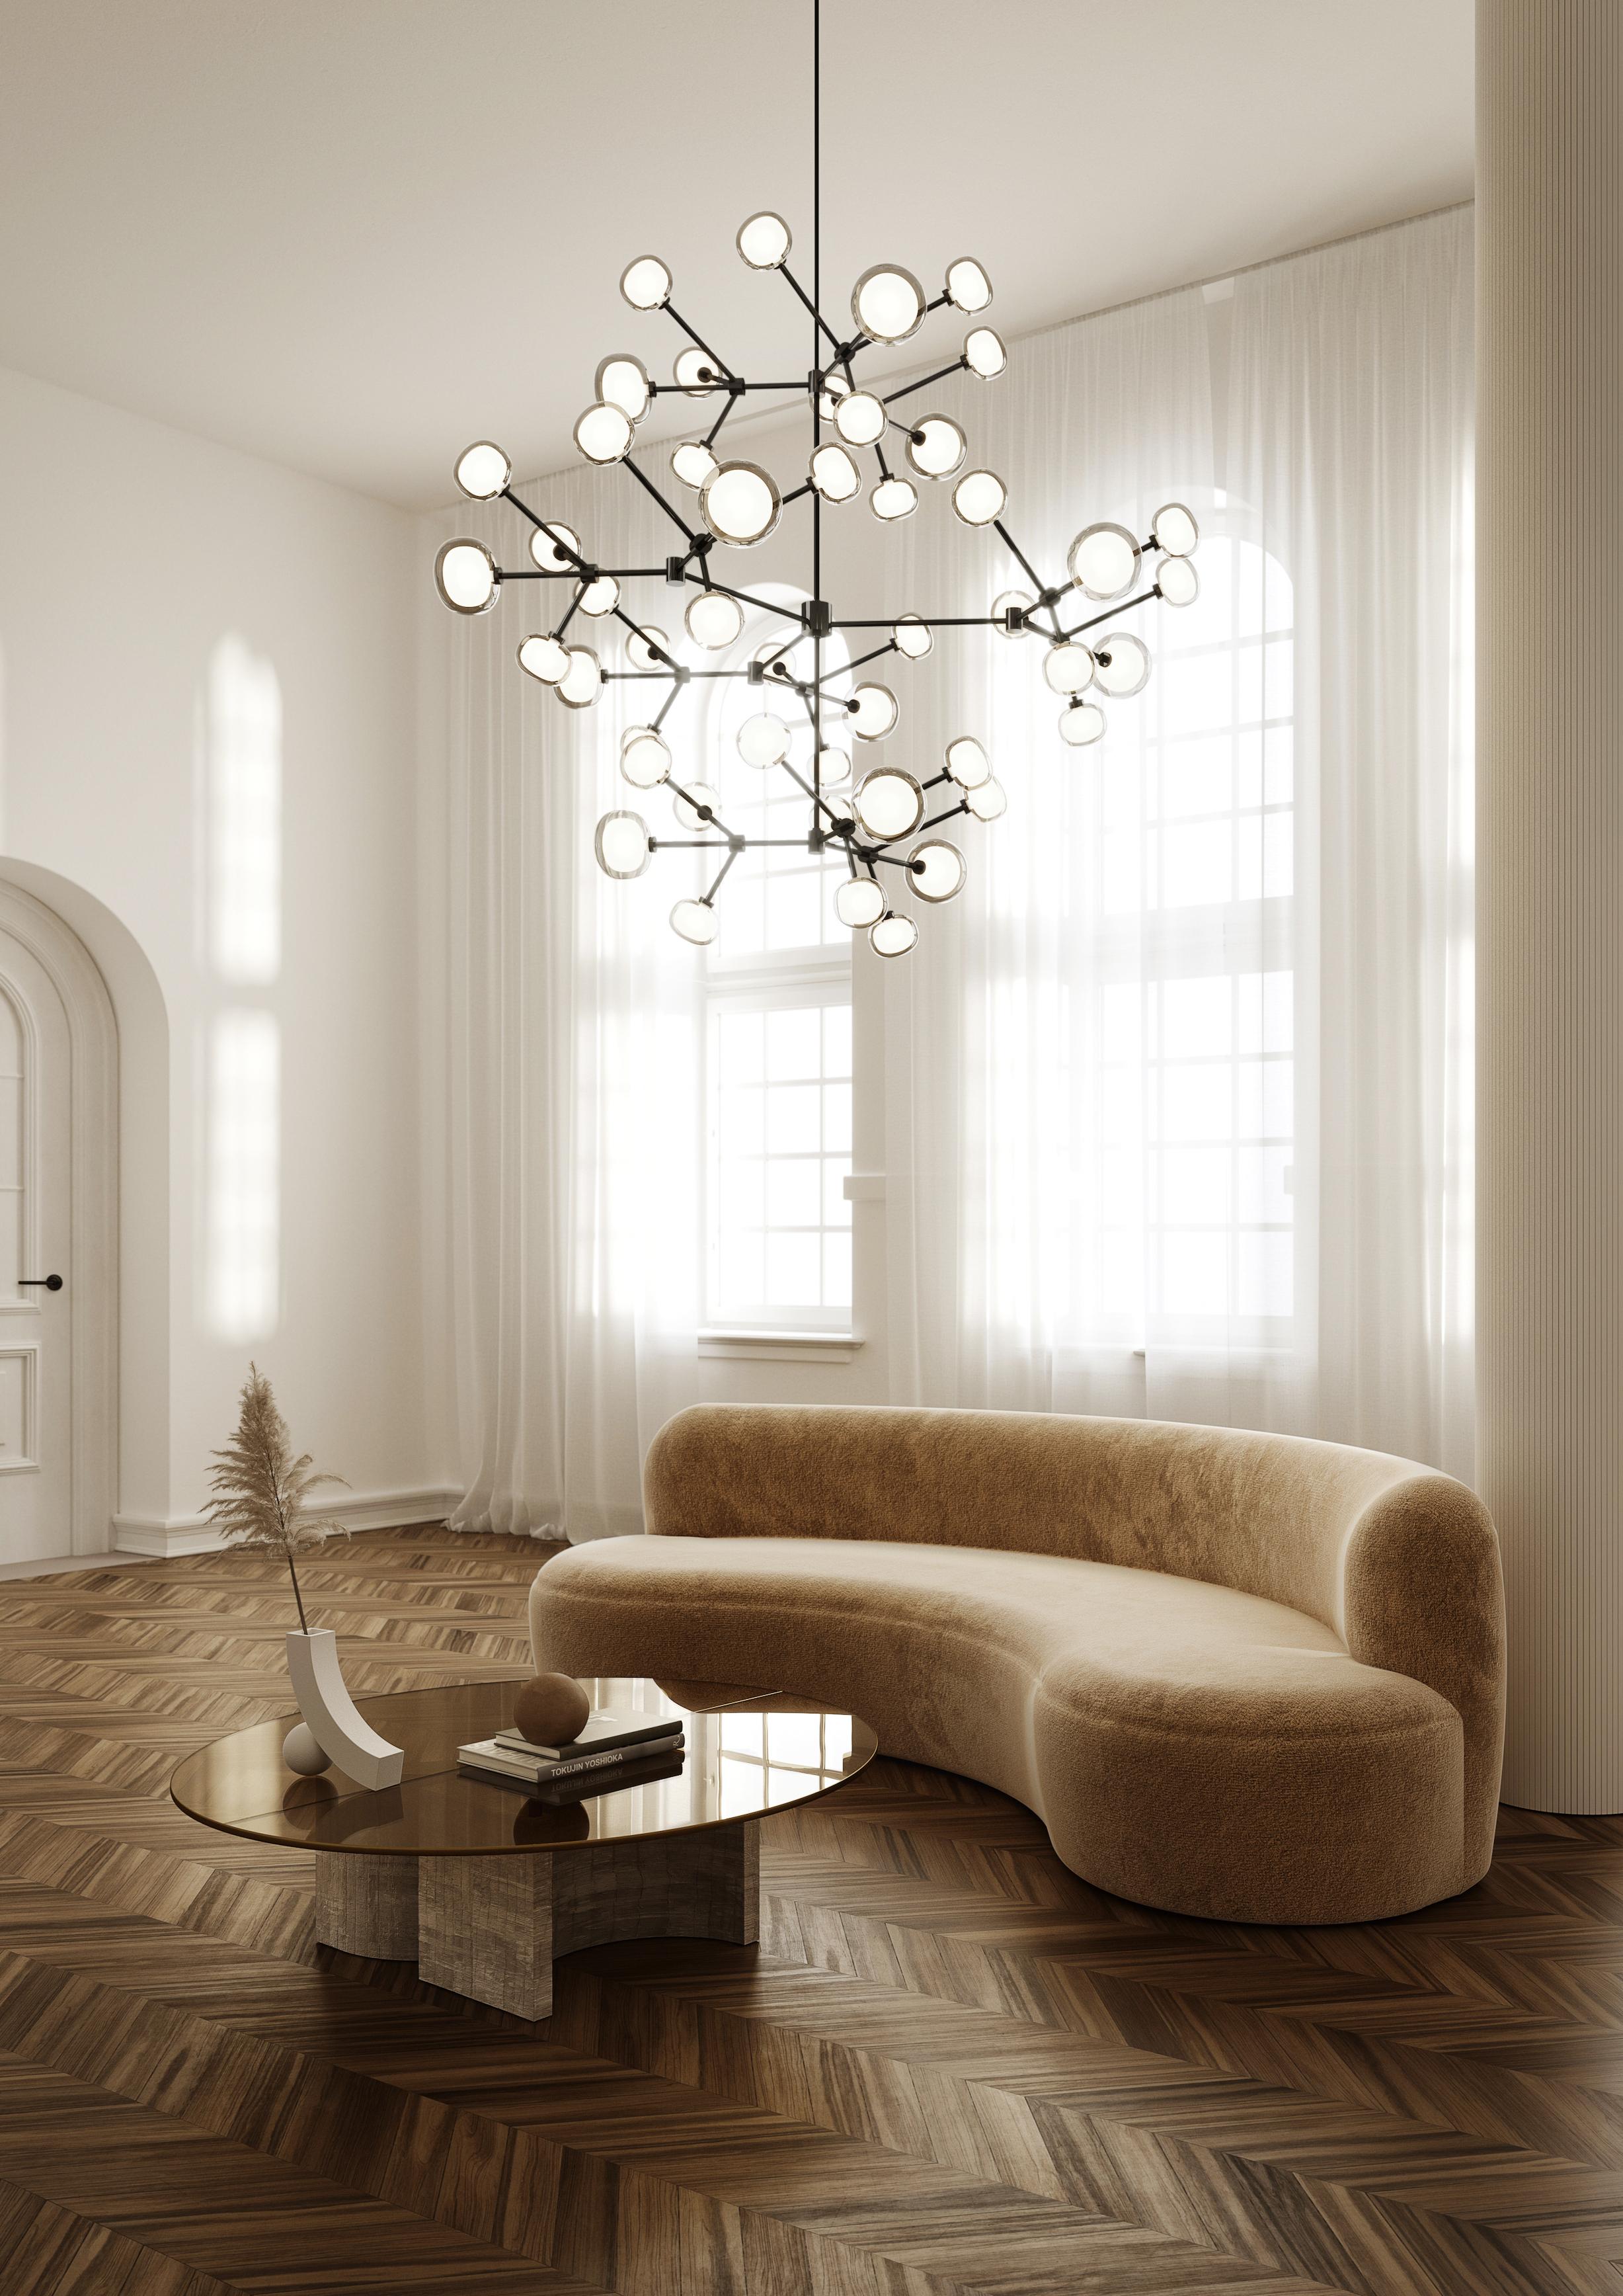 Chandelier Nabila 552.48 by Corrado Dotti x TOOY
48 lights
UL Listed 

Model shown:
Finish: Brass brushed
Color: Clear glass
Canopy: Ø 11 cm

Bulb compliance : 48 x G9 220/240V 3W Compliant with USA electric system

Chandelier: custom stem included